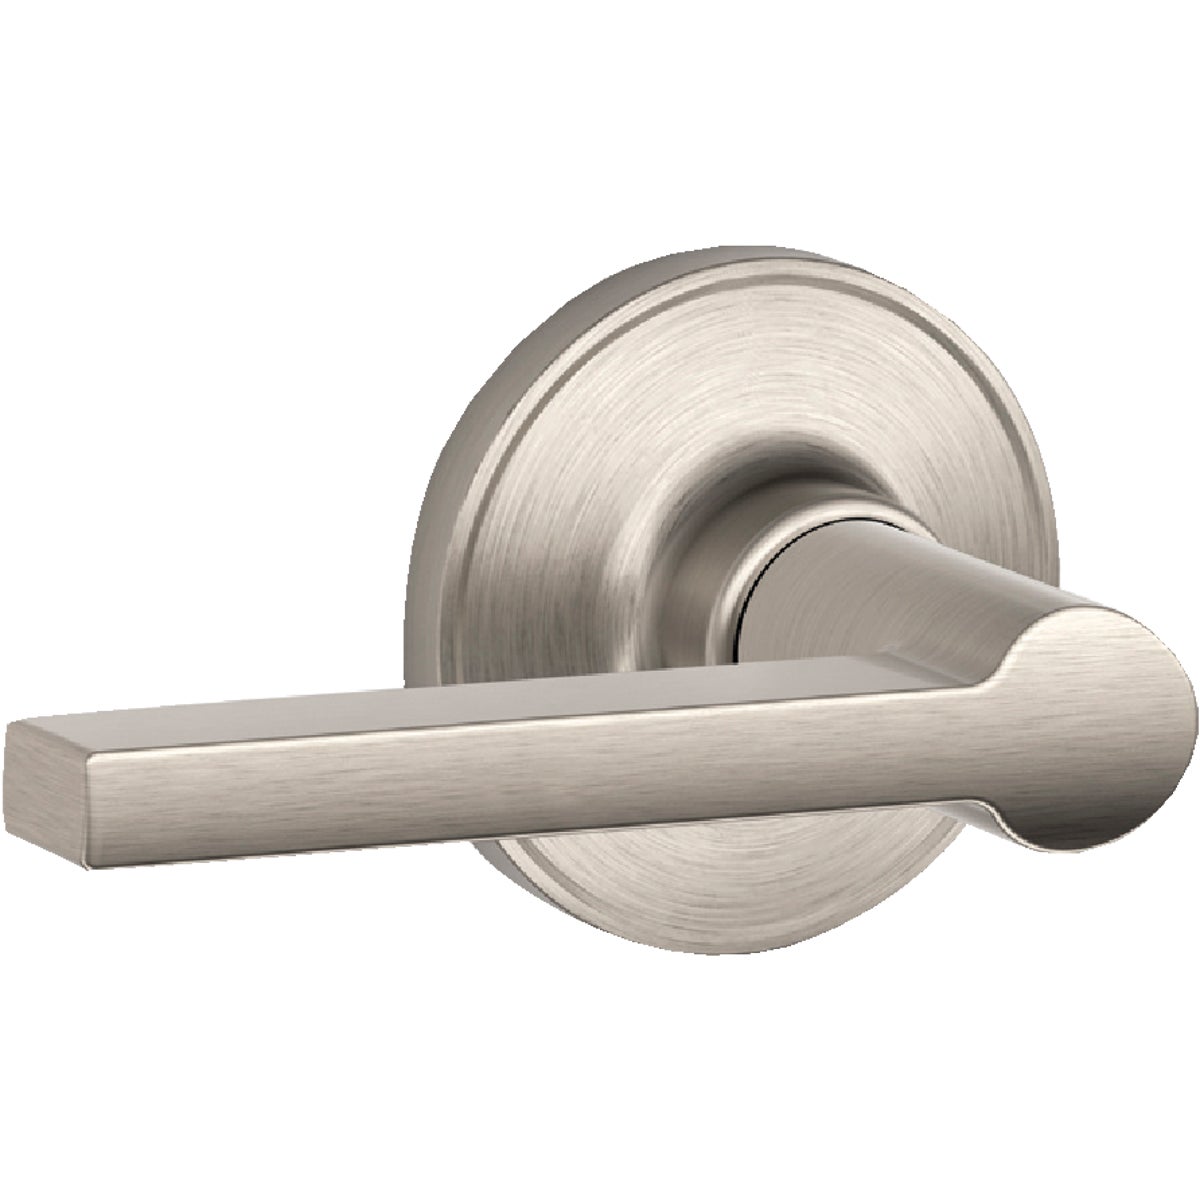 Item 201348, J-Series Solstice passage door lever for hall and closet function, both 